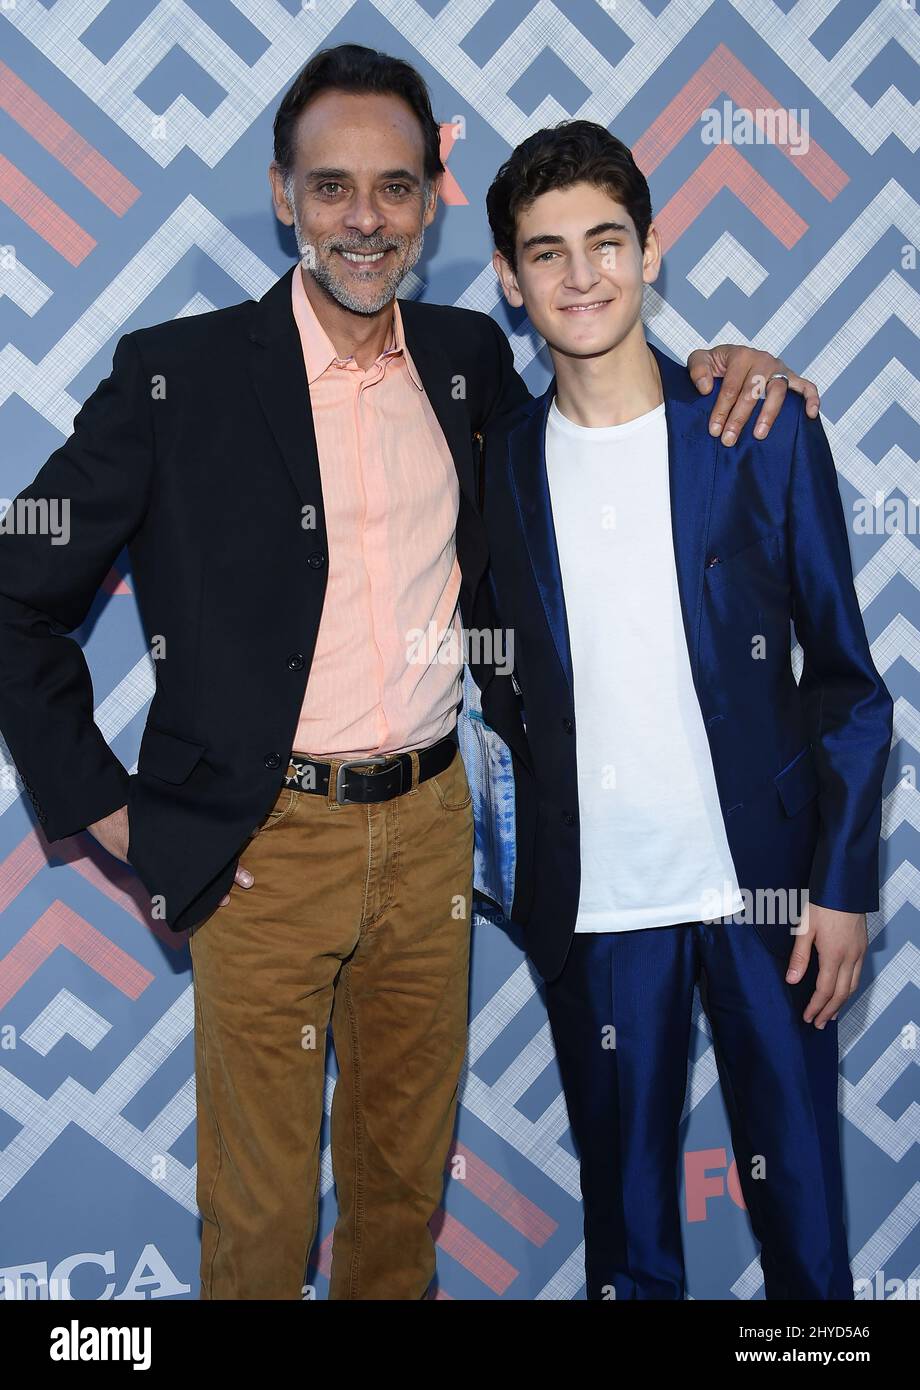 Alexander Siddig and David Mazouz attending the FOX TCA After Party held at the SoHo House Stock Photo